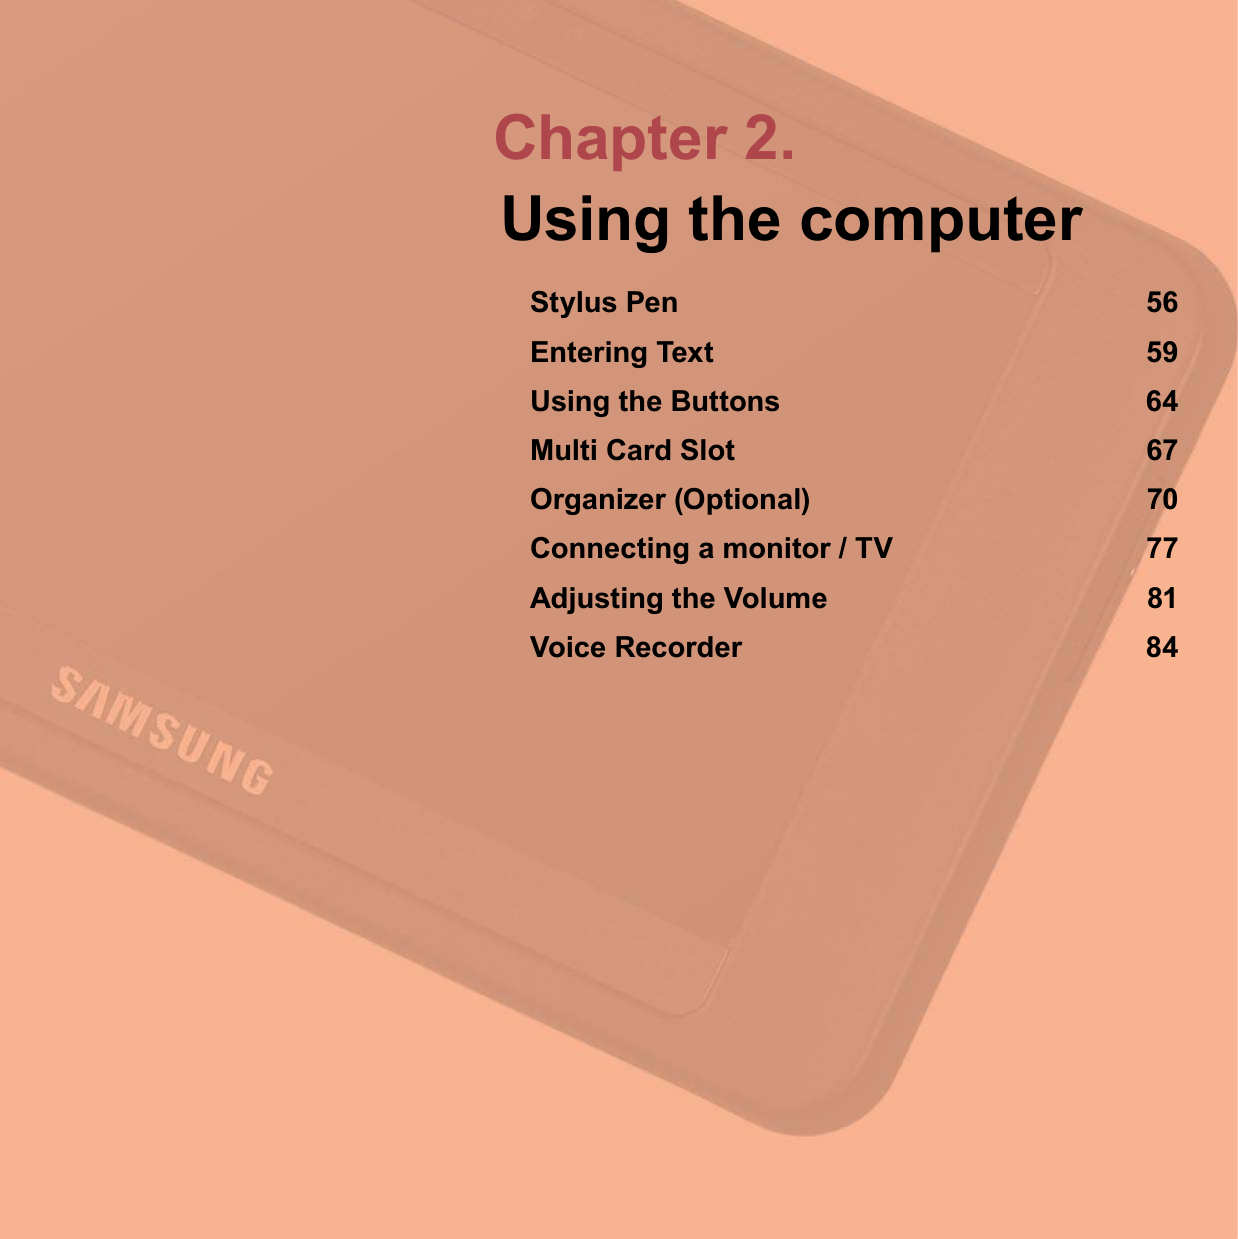 Chapter 2.Using the computerStylus Pen 56Entering Text 59Using the Buttons 64Multi Card Slot 67Organizer (Optional) 70Connecting a monitor / TV 77Adjusting the Volume 81Voice Recorder 84